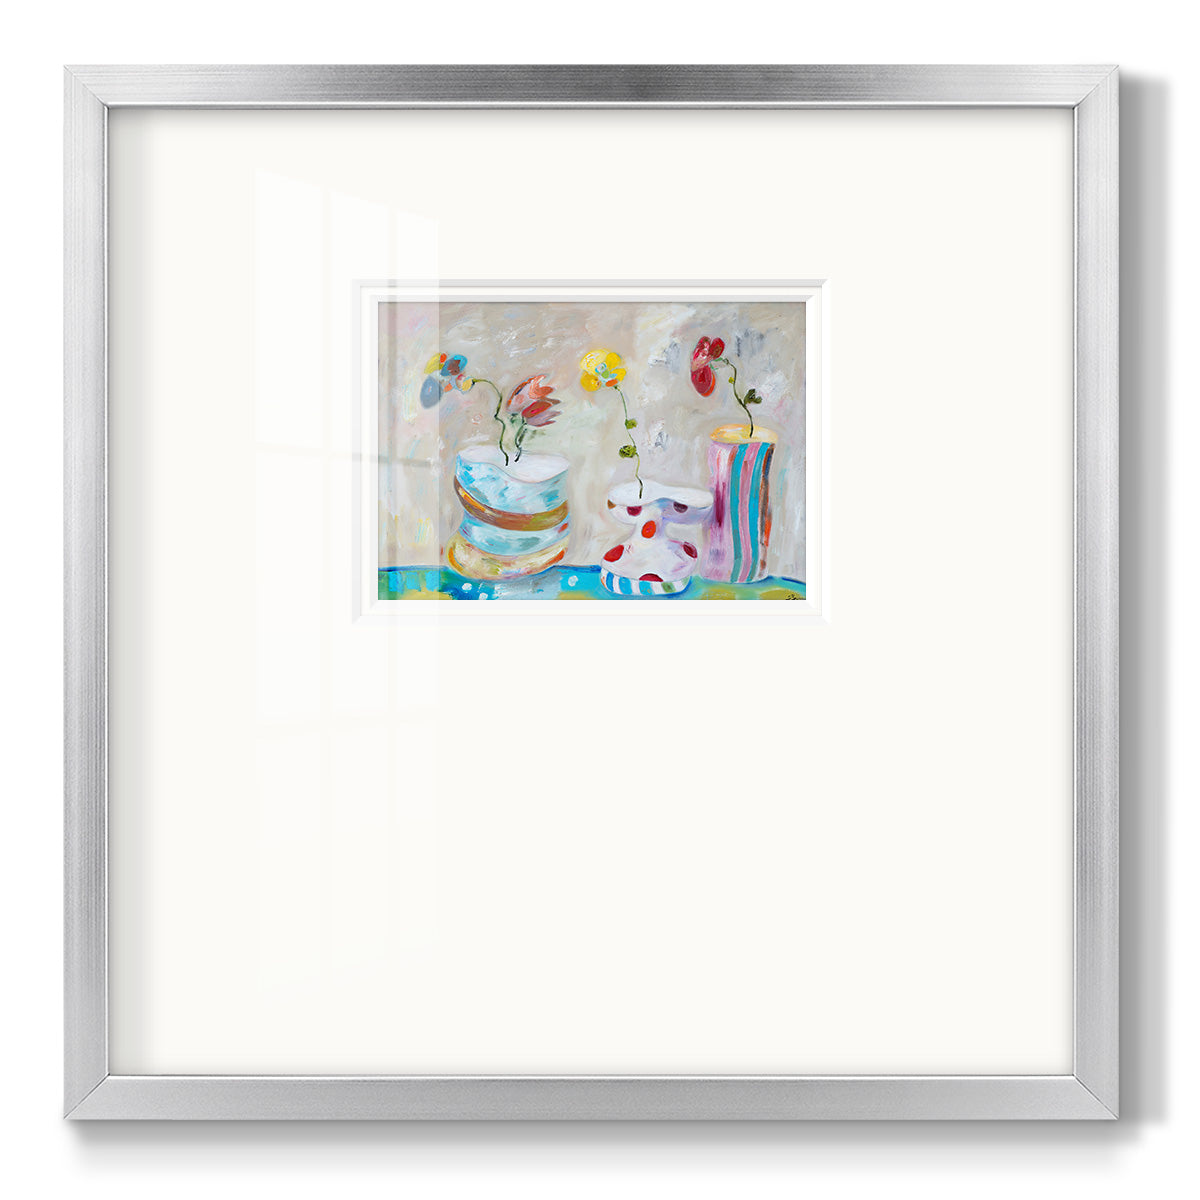 Play Time- Premium Framed Print Double Matboard